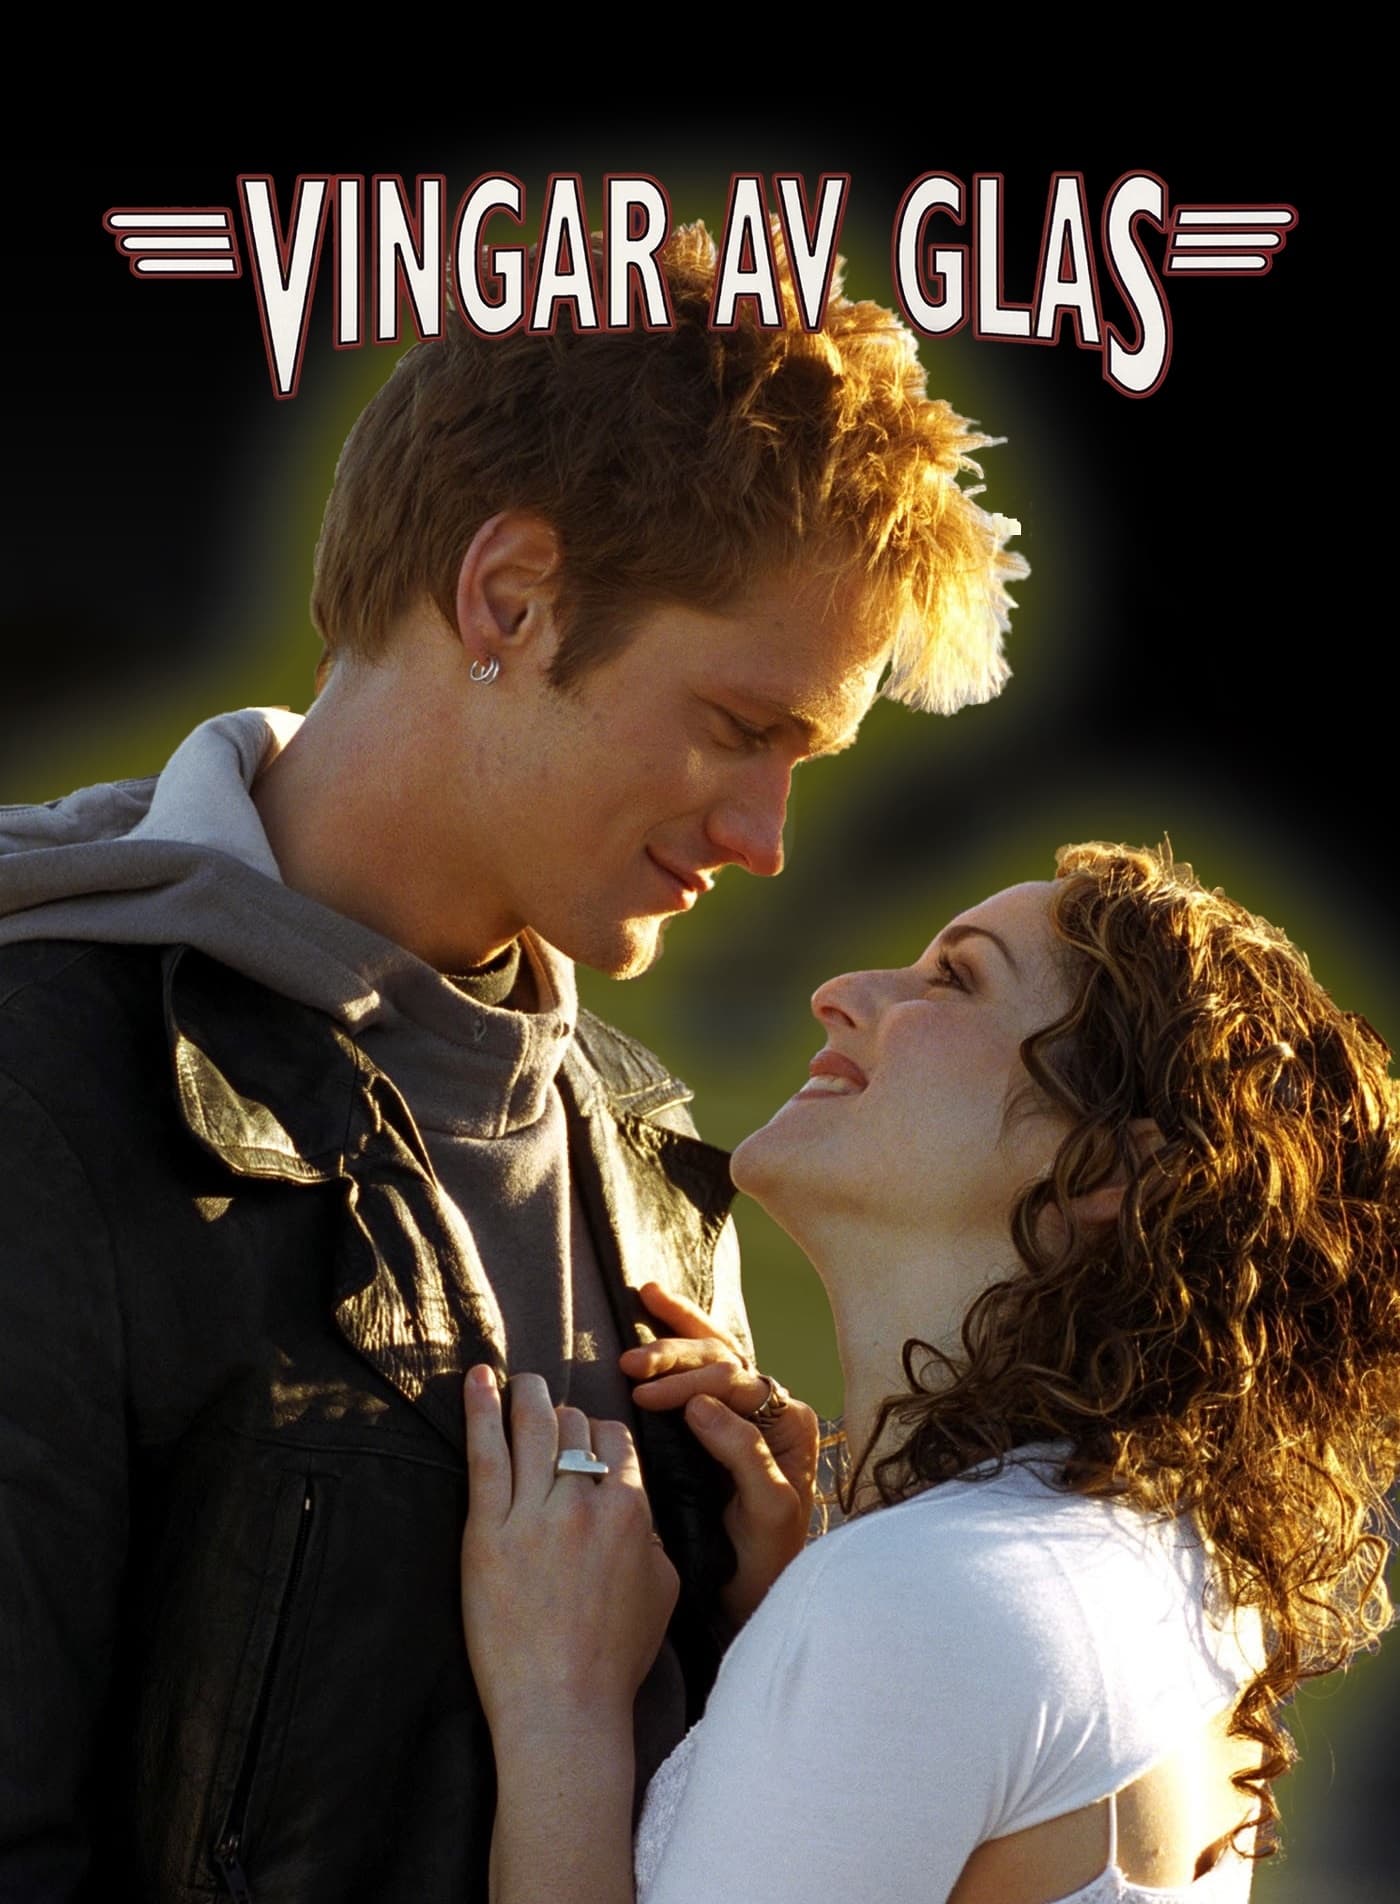 Wings of Glass (2000)